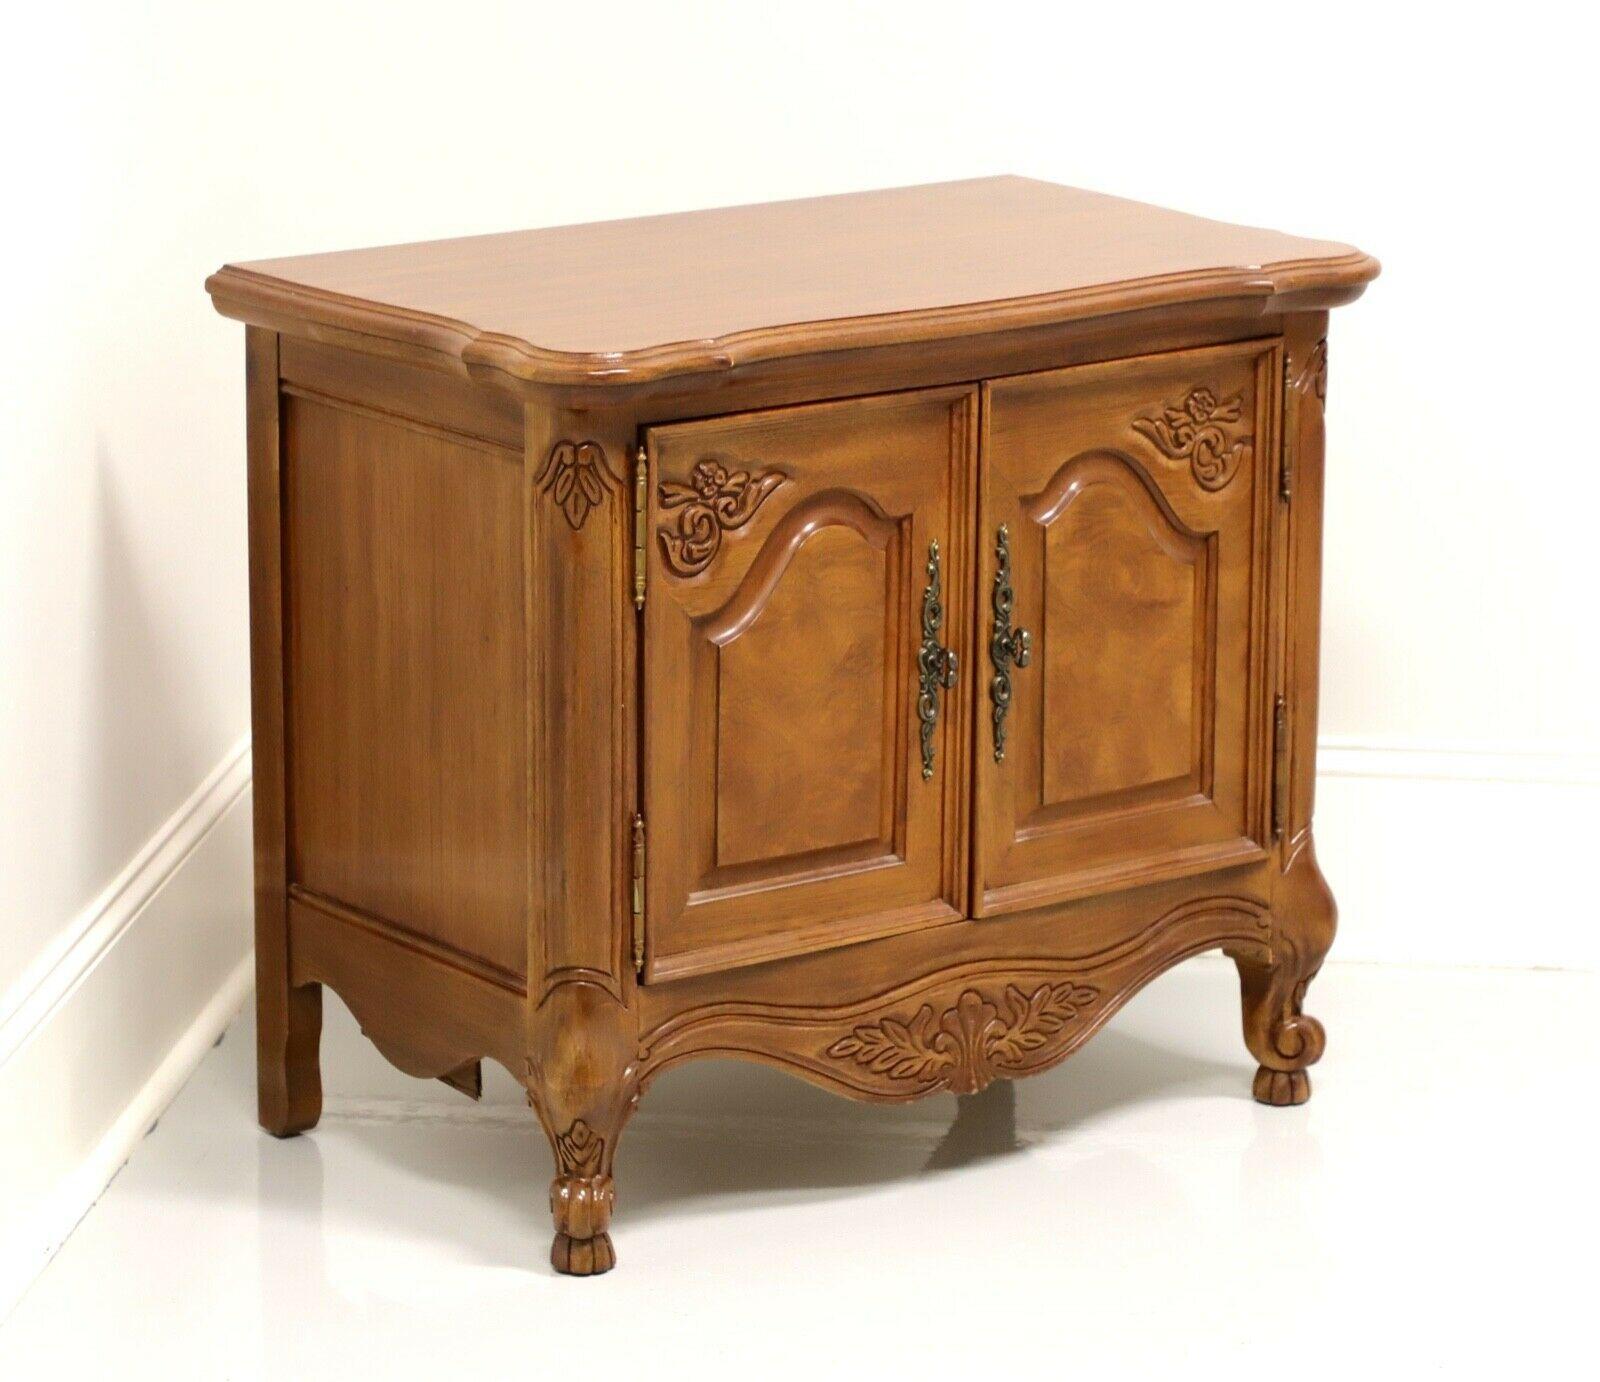 LEXINGTON Chateau Latour French Country Walnut Nightstand 4